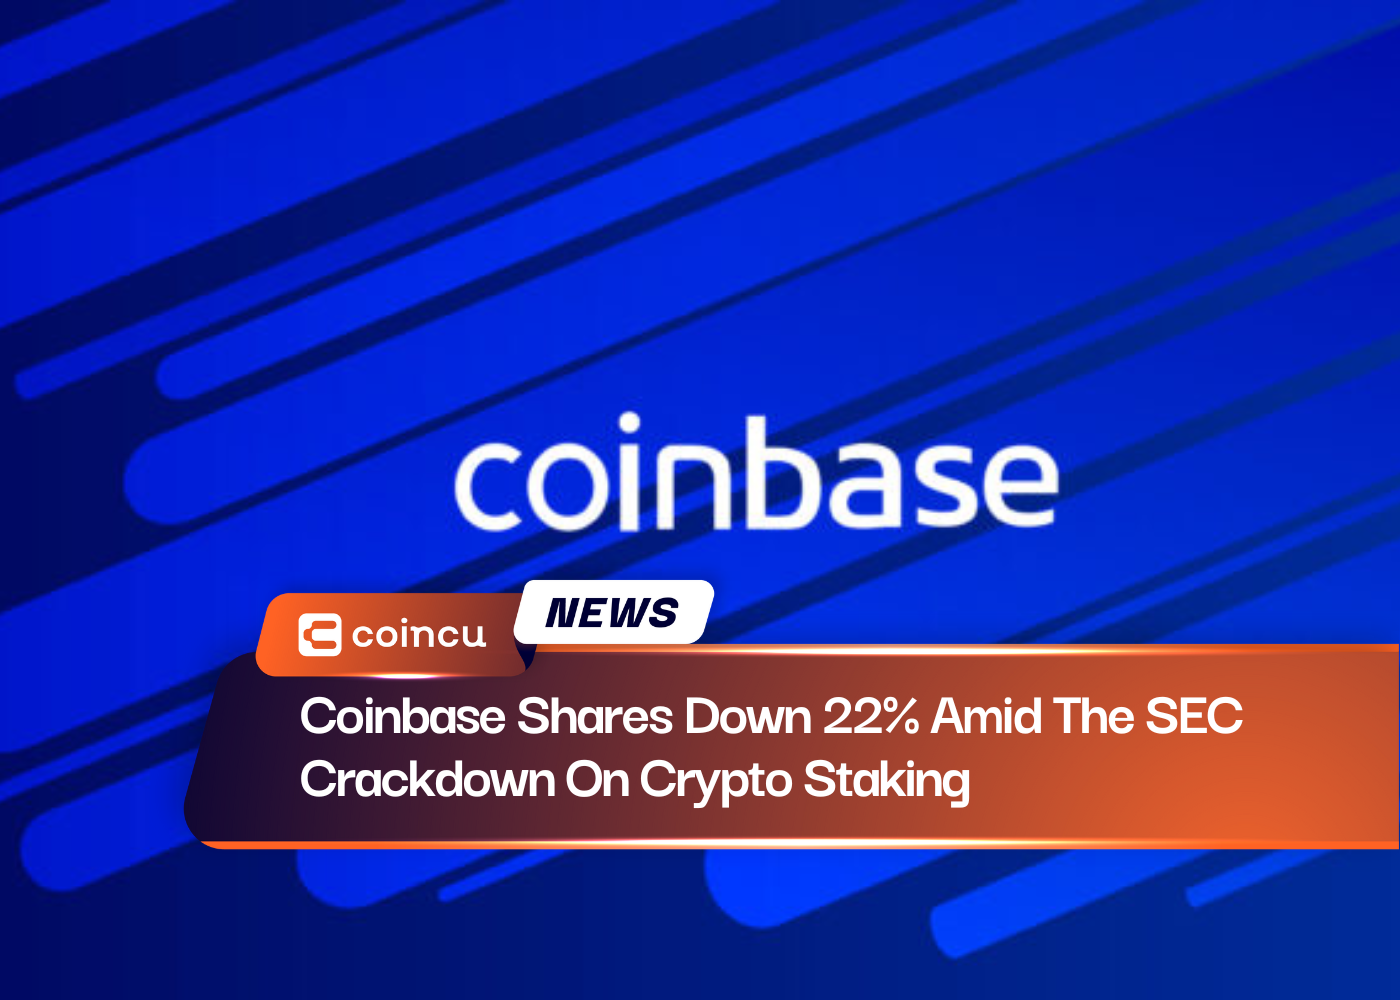 Coinbase Shares Down 22% Amid The SEC Crackdown On Crypto Staking